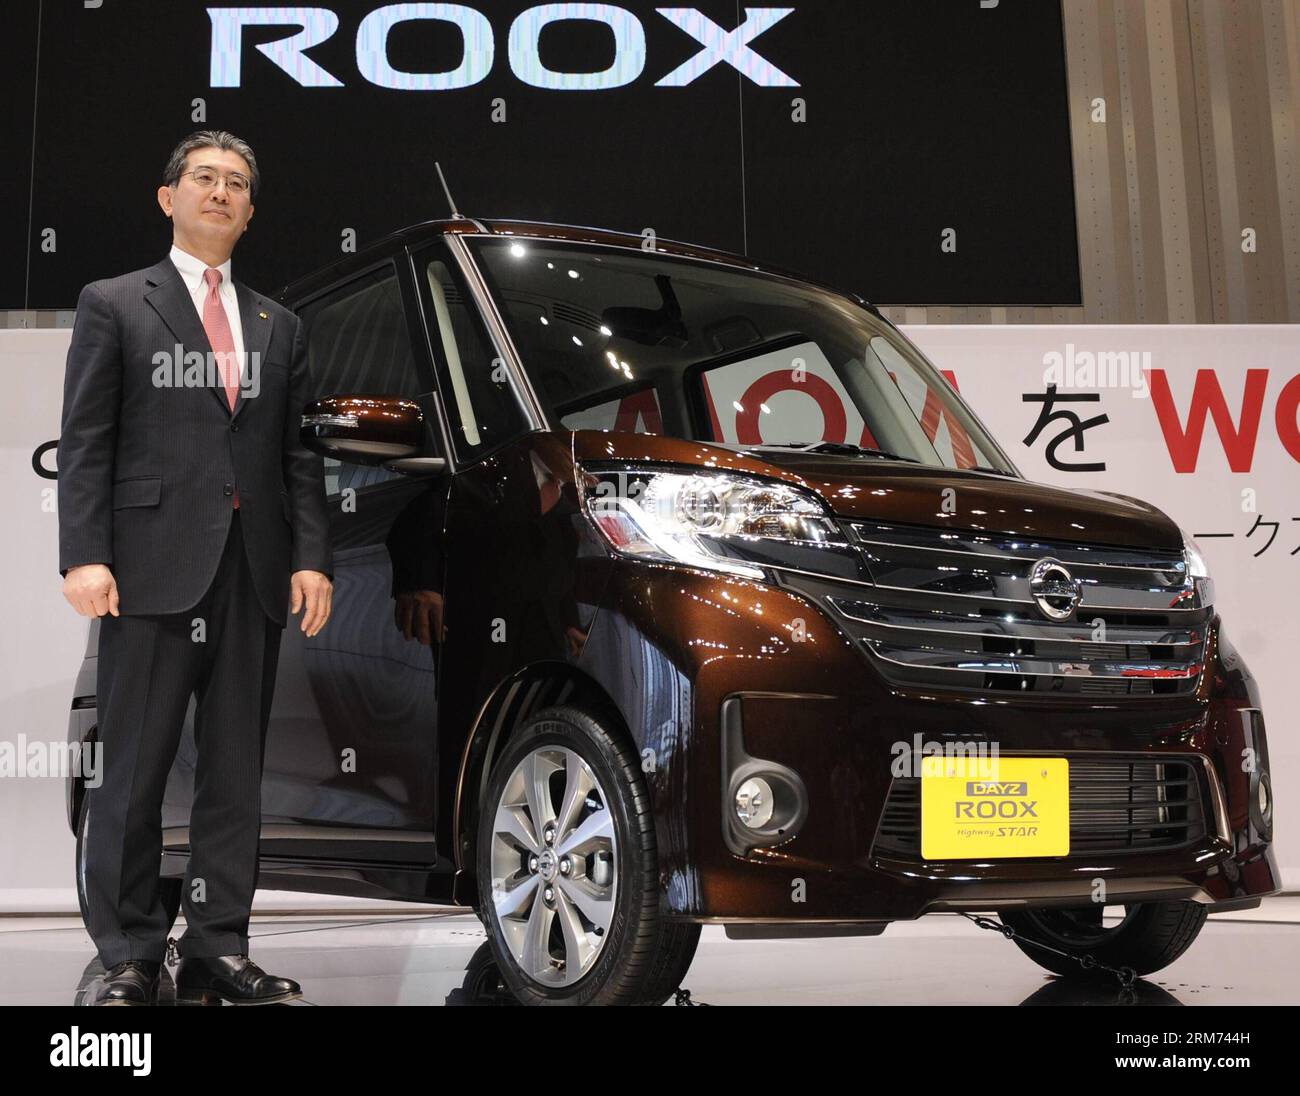 (140213) -- YOKOHAMA, Feb. 13, 2014 (Xinhua) -- Japan s auto giant Nissan s Vice President Takao Katagiri stands by Nissan s new model Dayz Roox at the headquarters of Nissan Motor in Yokohama, Japan, Feb. 13, 2014. Nissan s Dayz Roox was released on Thursday throughout Japan. (Xinhua/Stringer) JAPAN-YOKOHAMA-AUTO-NISSAN-NEW CAR PUBLICATIONxNOTxINxCHN   Yokohama Feb 13 2014 XINHUA Japan S Car Giant Nissan S Vice President Takao Katagiri stands by Nissan S New Model   AT The Headquarters of Nissan Engine in Yokohama Japan Feb 13 2014 Nissan S   what released ON Thursday throughout Japan XINHUA Stock Photo